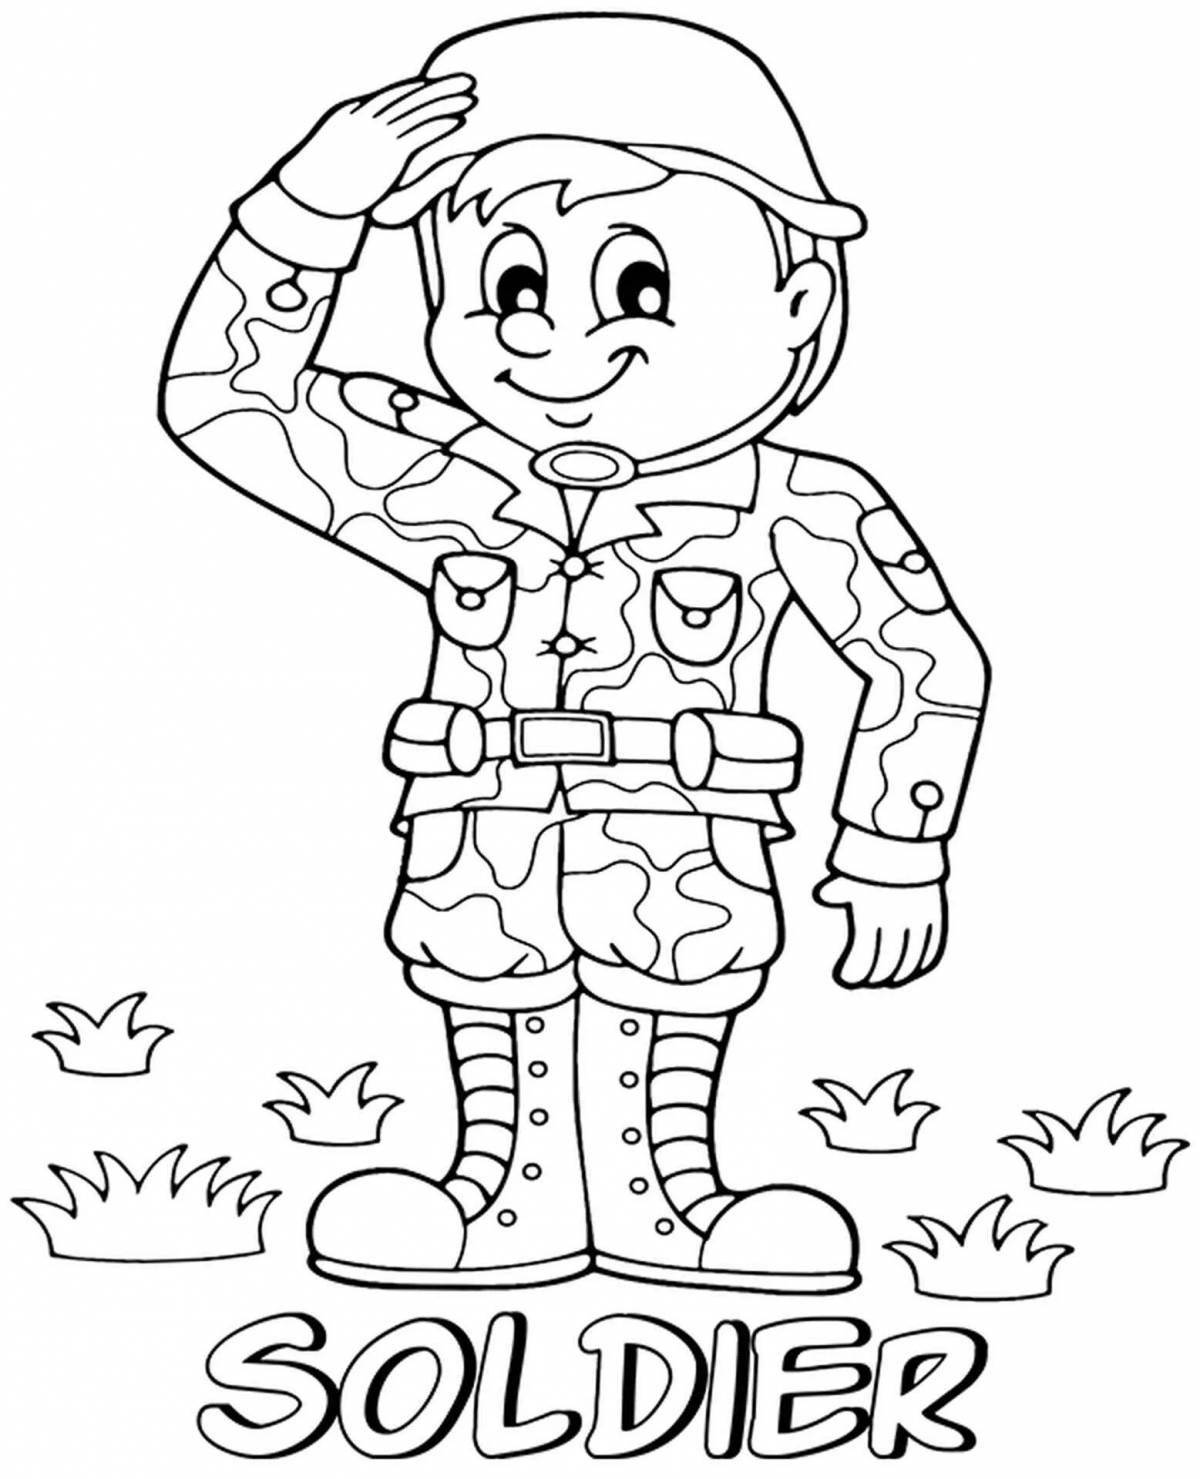 Shining Military Profession coloring page